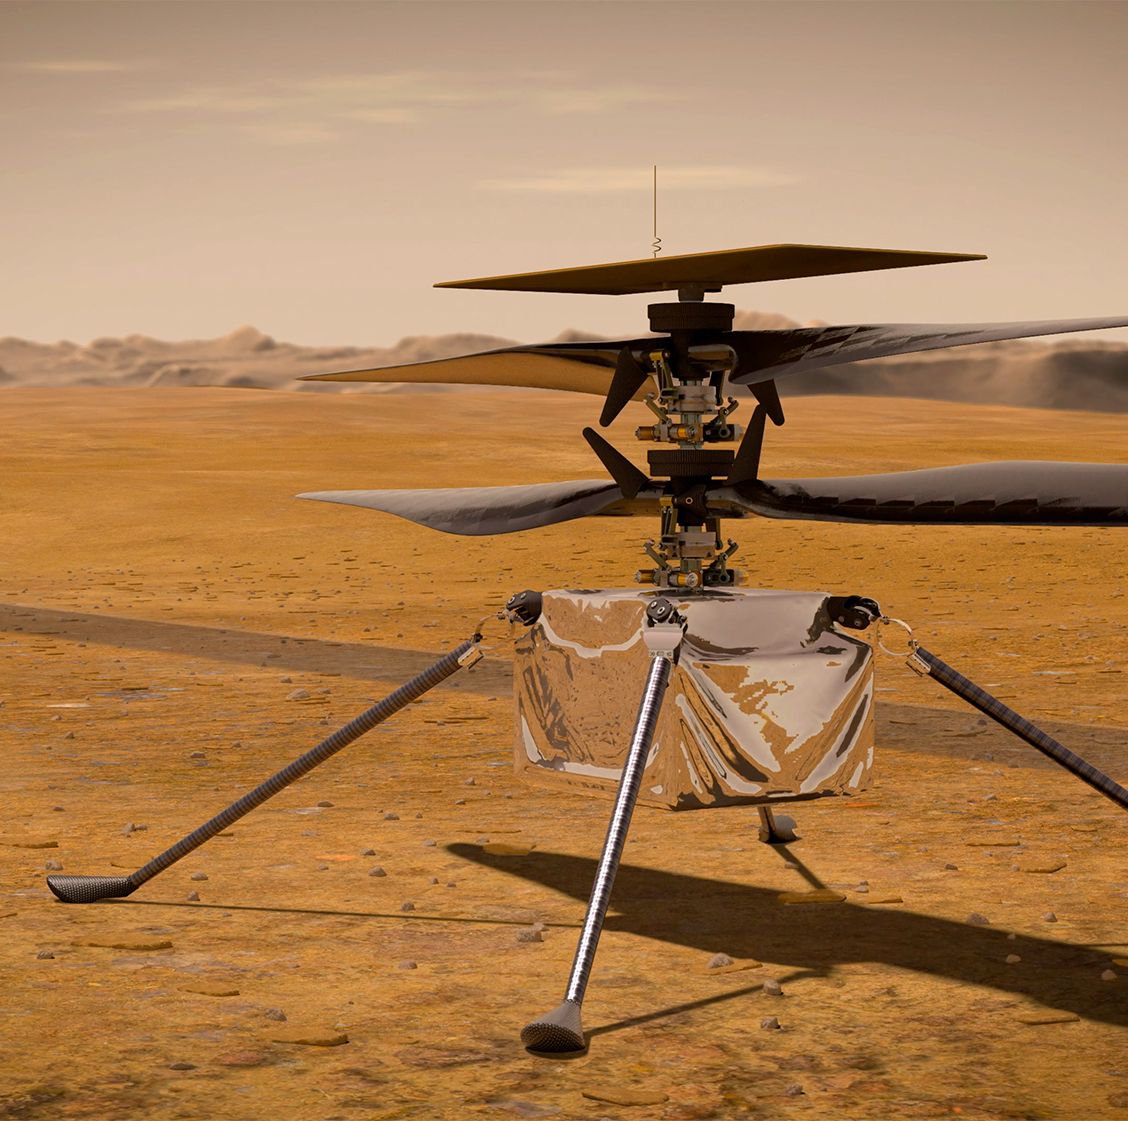 Meet the First Helo on Mars: A Deep Dive Into What Makes Ingenuity So…Ingenious